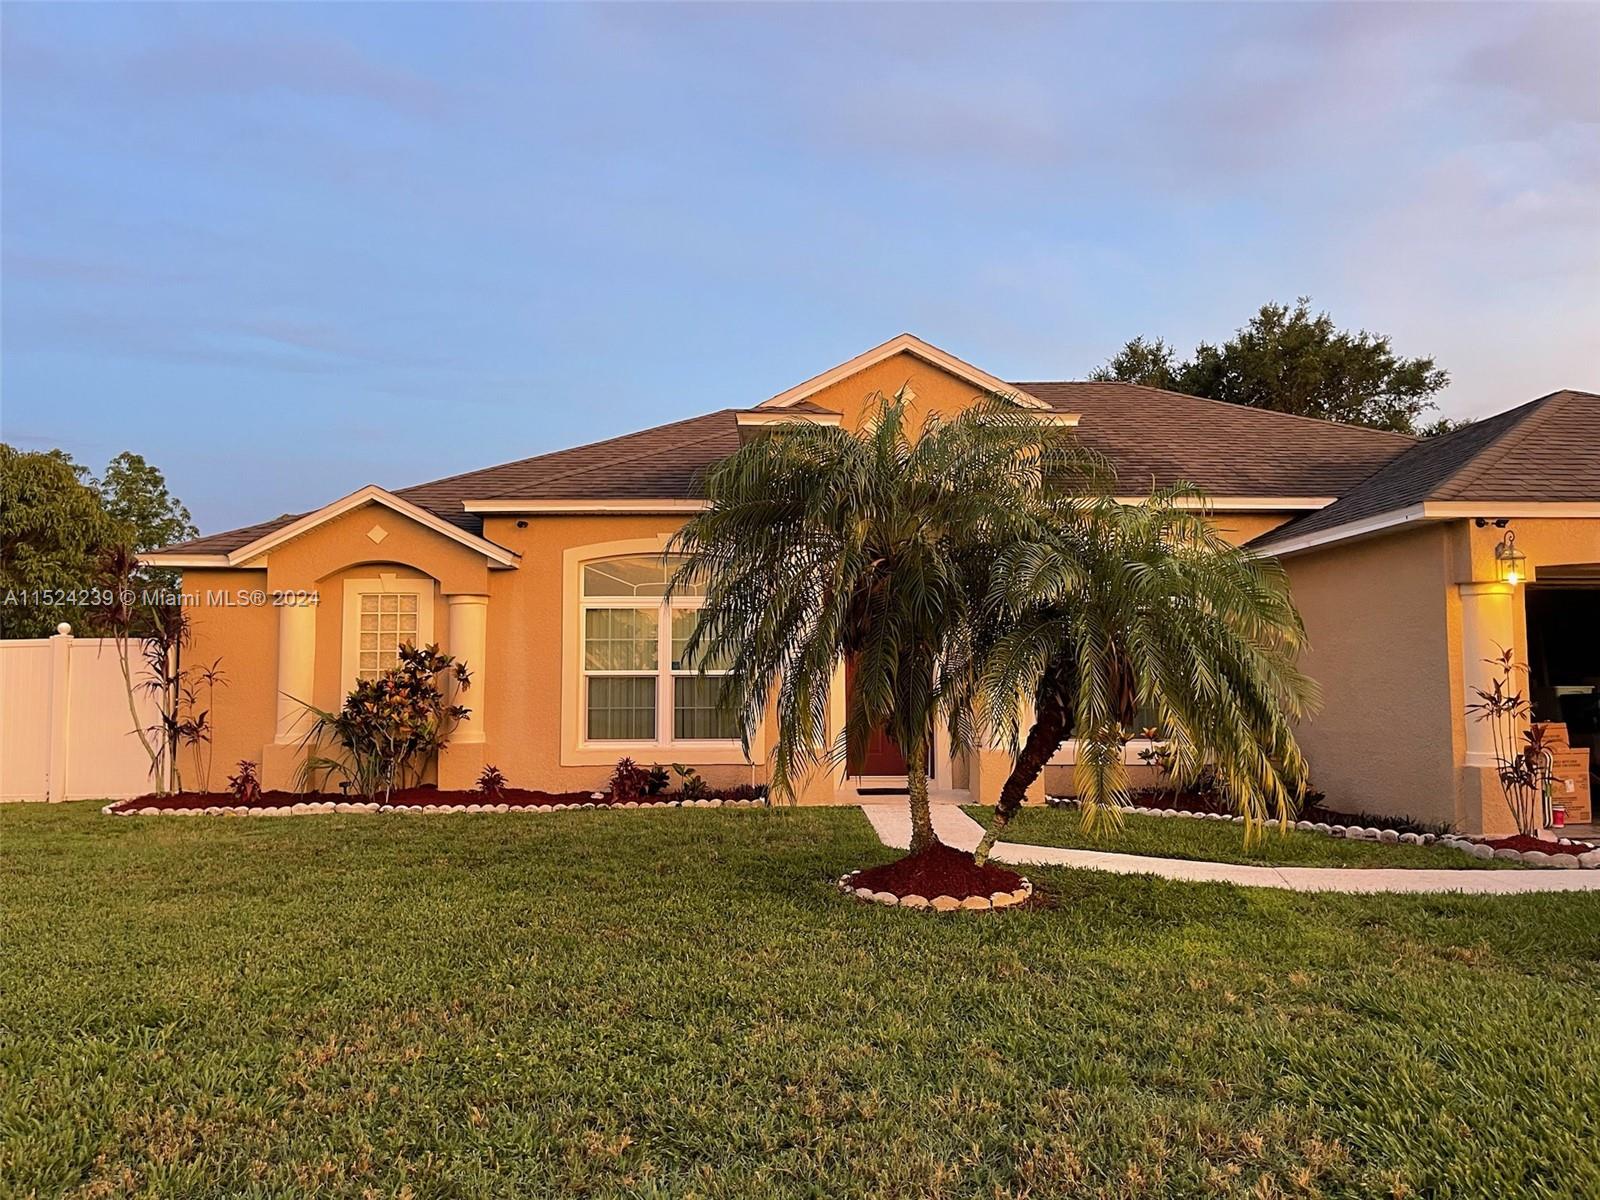 3518 Beau Chene Drive Dr, Kissimmee,  - 5 Bedrooms  
4 Bathrooms - 